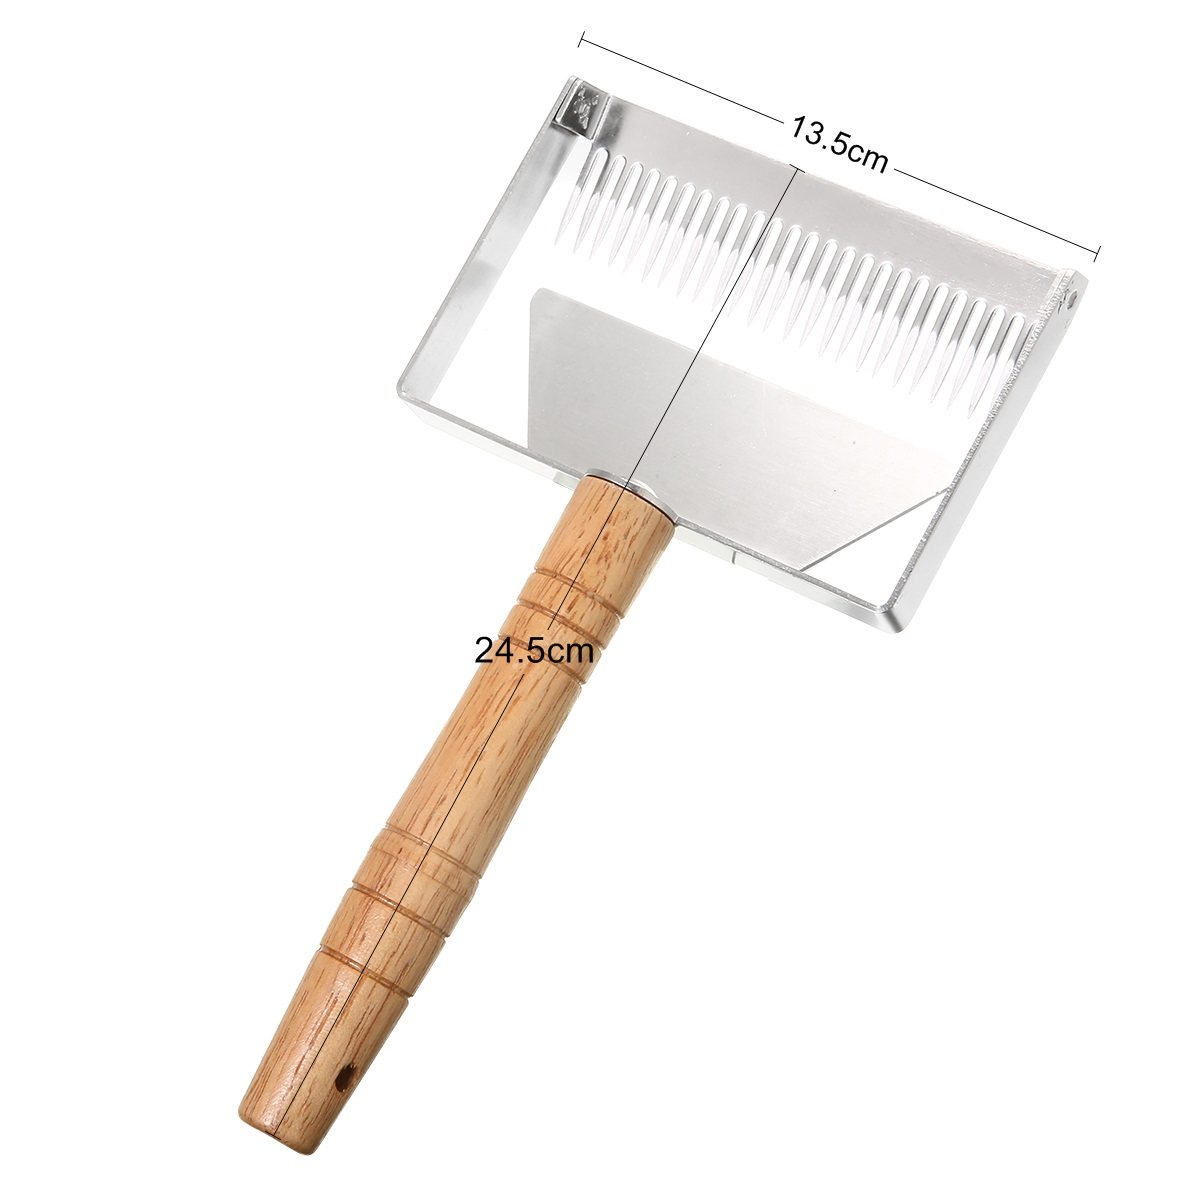 15cm Honey Fork Stainless Steel 25cm Uncapping Honey Fork Scraper Tools Wooden Handle For Beekeeping Uncapping Fork Tools